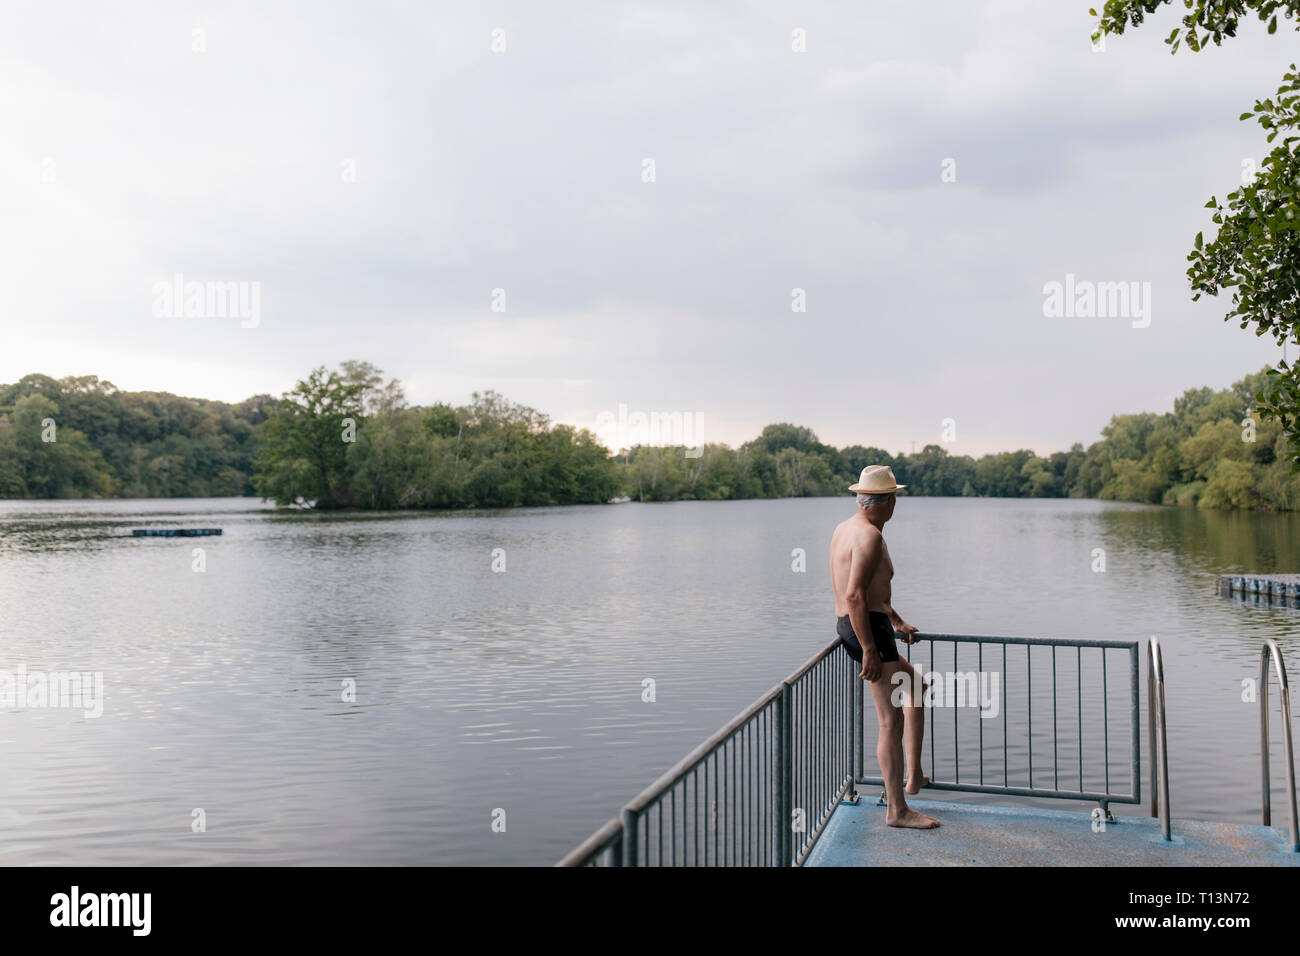 Senior man wearing straw hat standing at a lake Banque D'Images